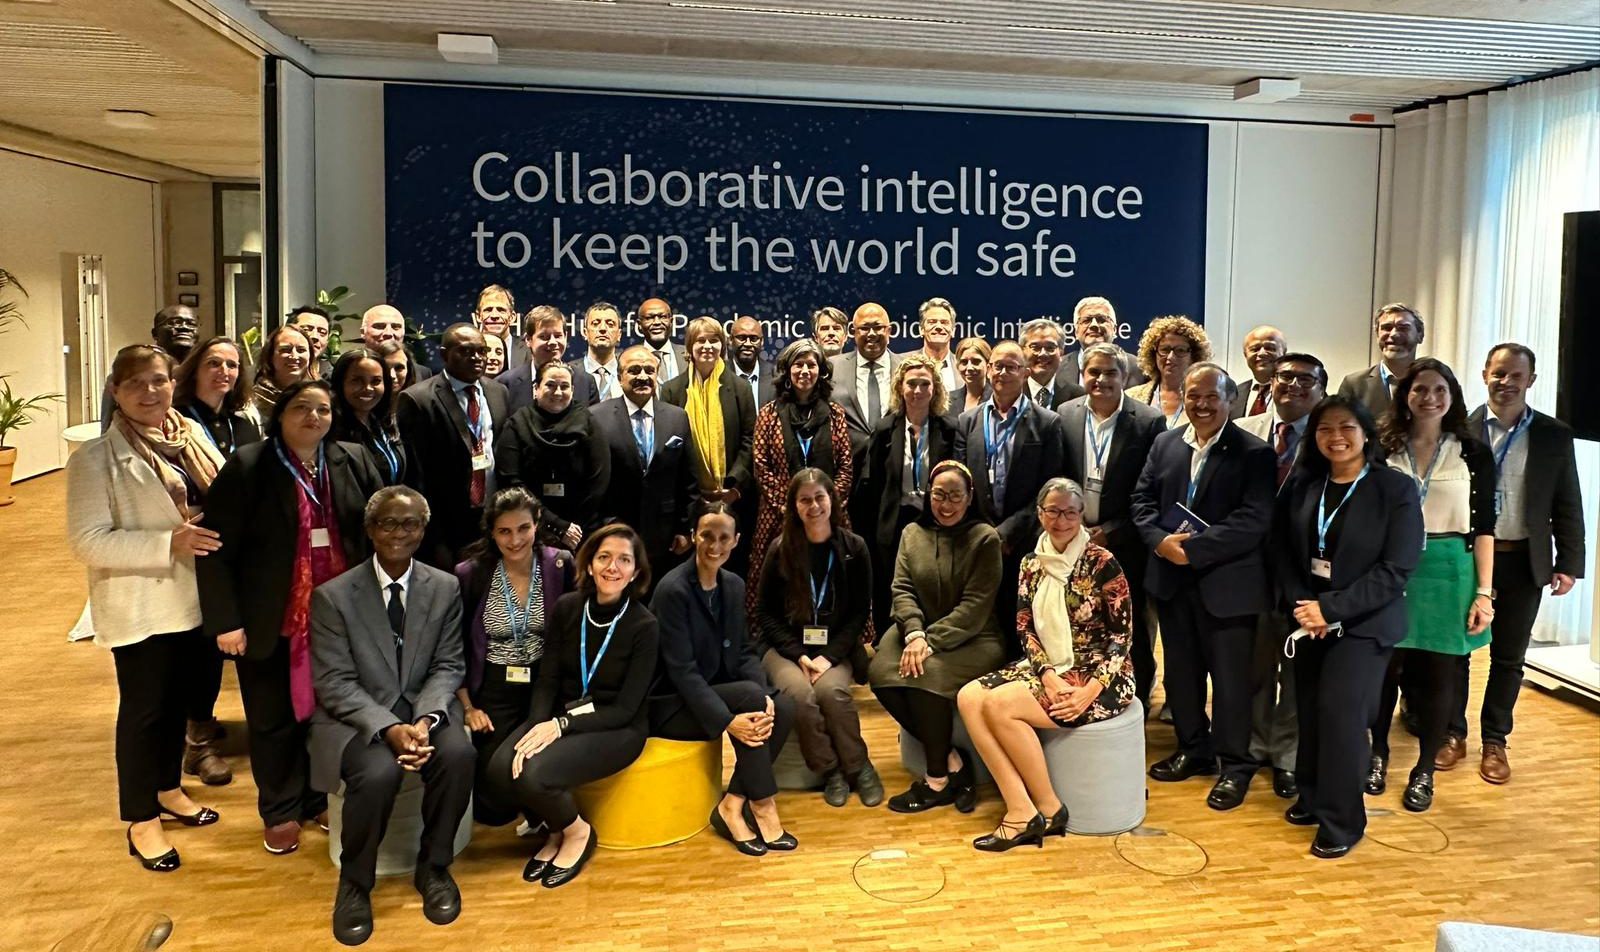 Group photo of participants in front of a sign that says collaborative intelligence to keep the world safe